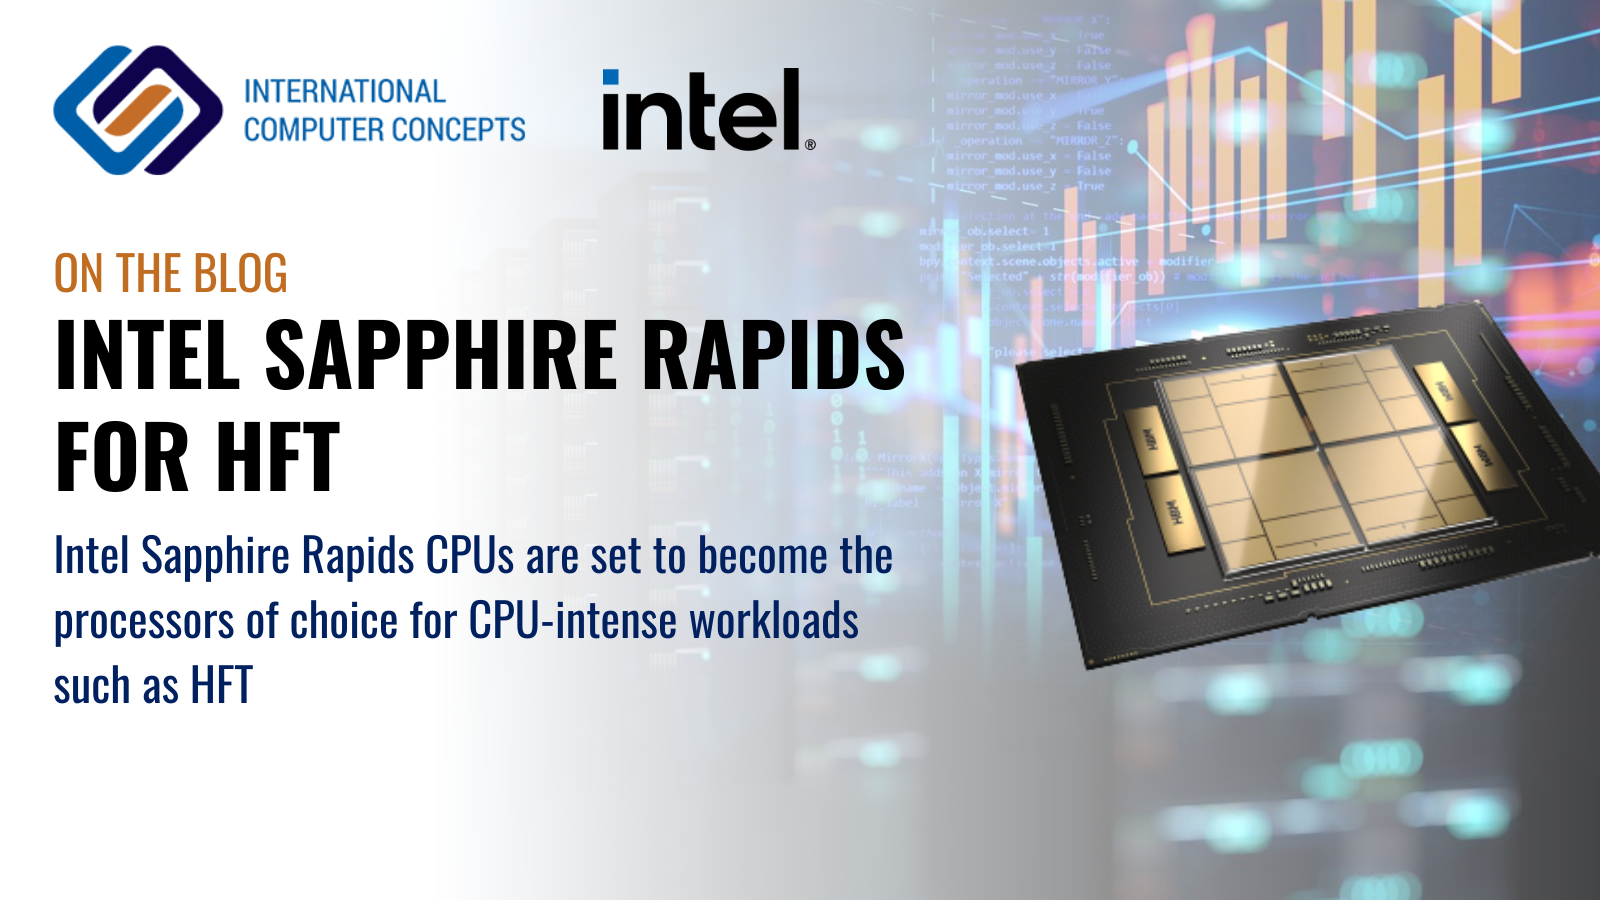 Next generation High Frequency Trading servers with Intel Sapphire Rapids